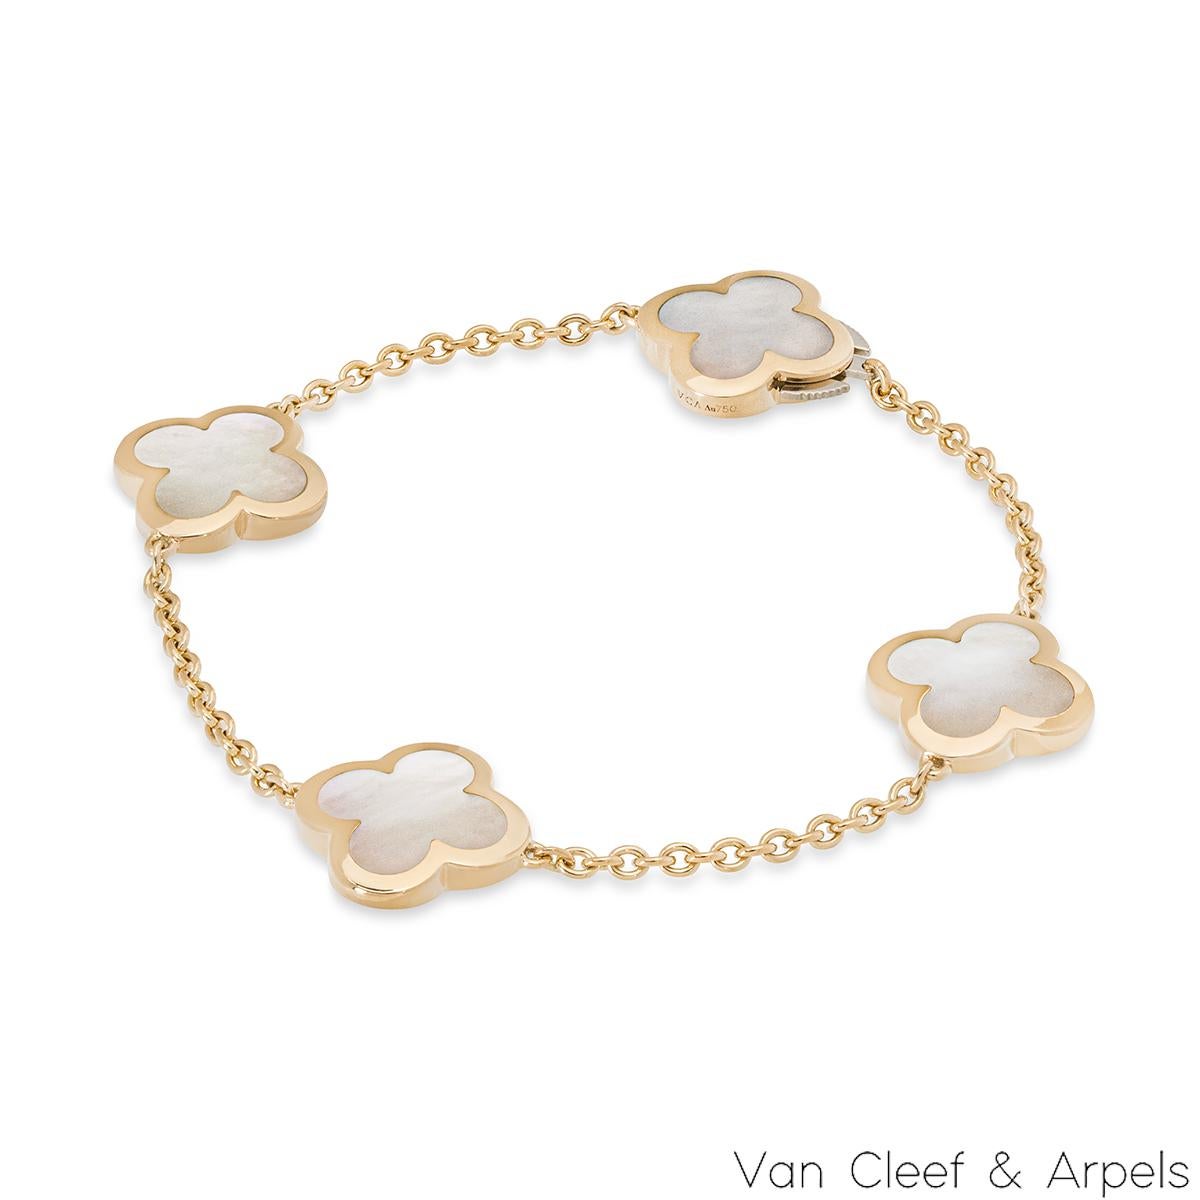 An 18k yellow gold Pure Alhambra bracelet by Van Cleef & Arpels. The bracelet is composed of 4 iconic four leaf clover motifs, set to the centre with mother of pearl inlays and a polished outer edge. The bracelet measures 7 inches in length and has